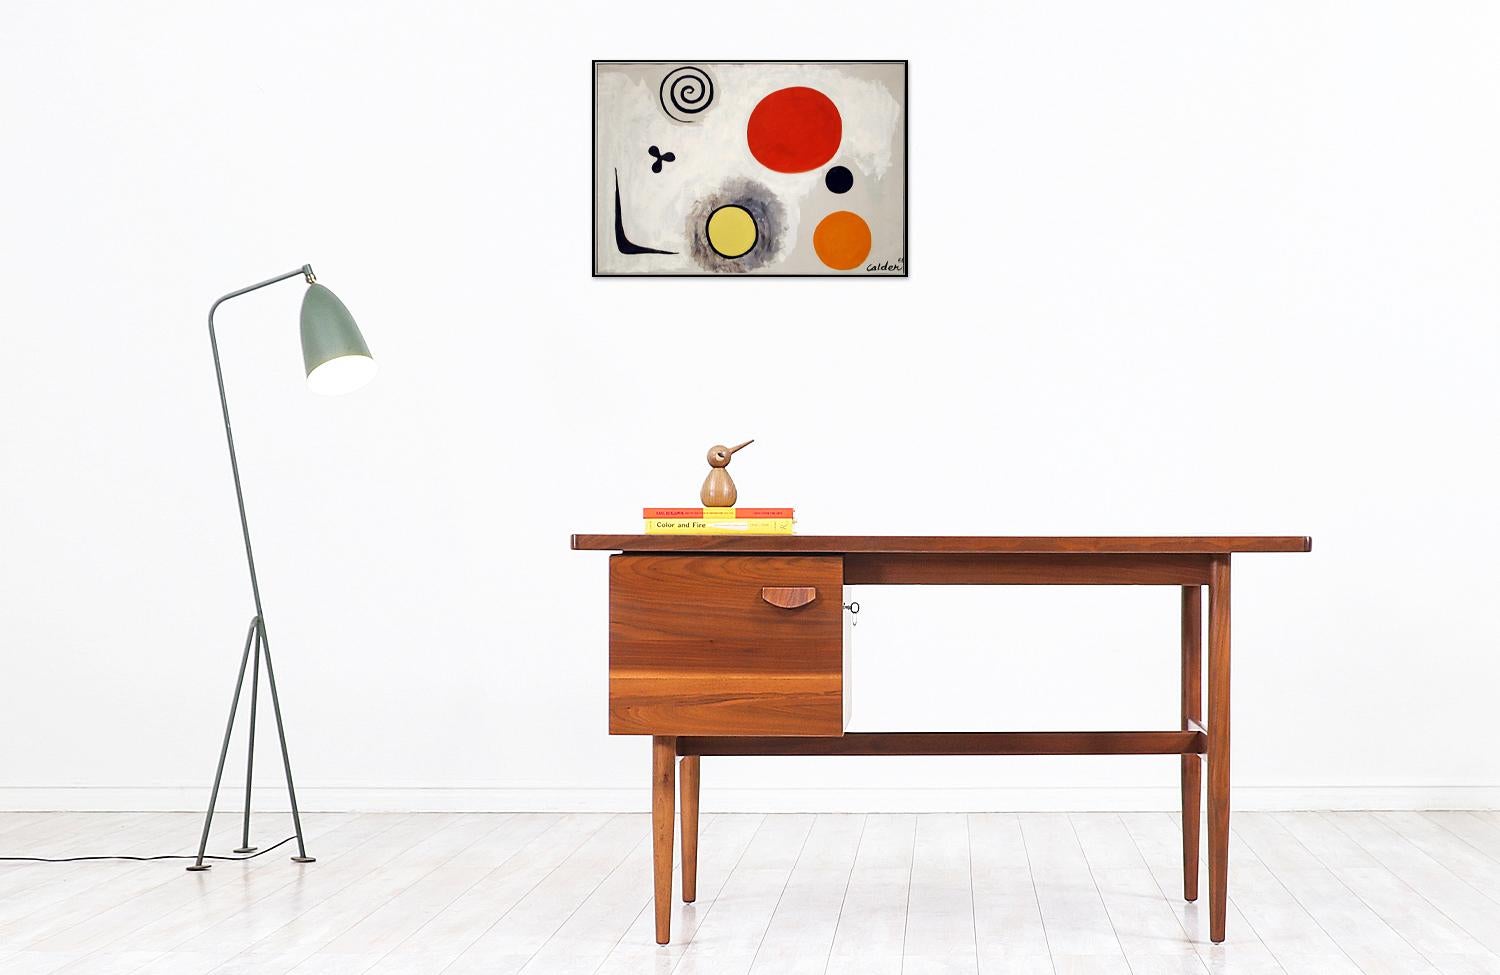 Elegant modern writing desk designed by Jens Risom for Jens Risom Inc. in the United States circa the 1950s. This stylish desk features a walnut wood frame and a file cabinet on the right side for ample storage space. The drawer has a sculpted